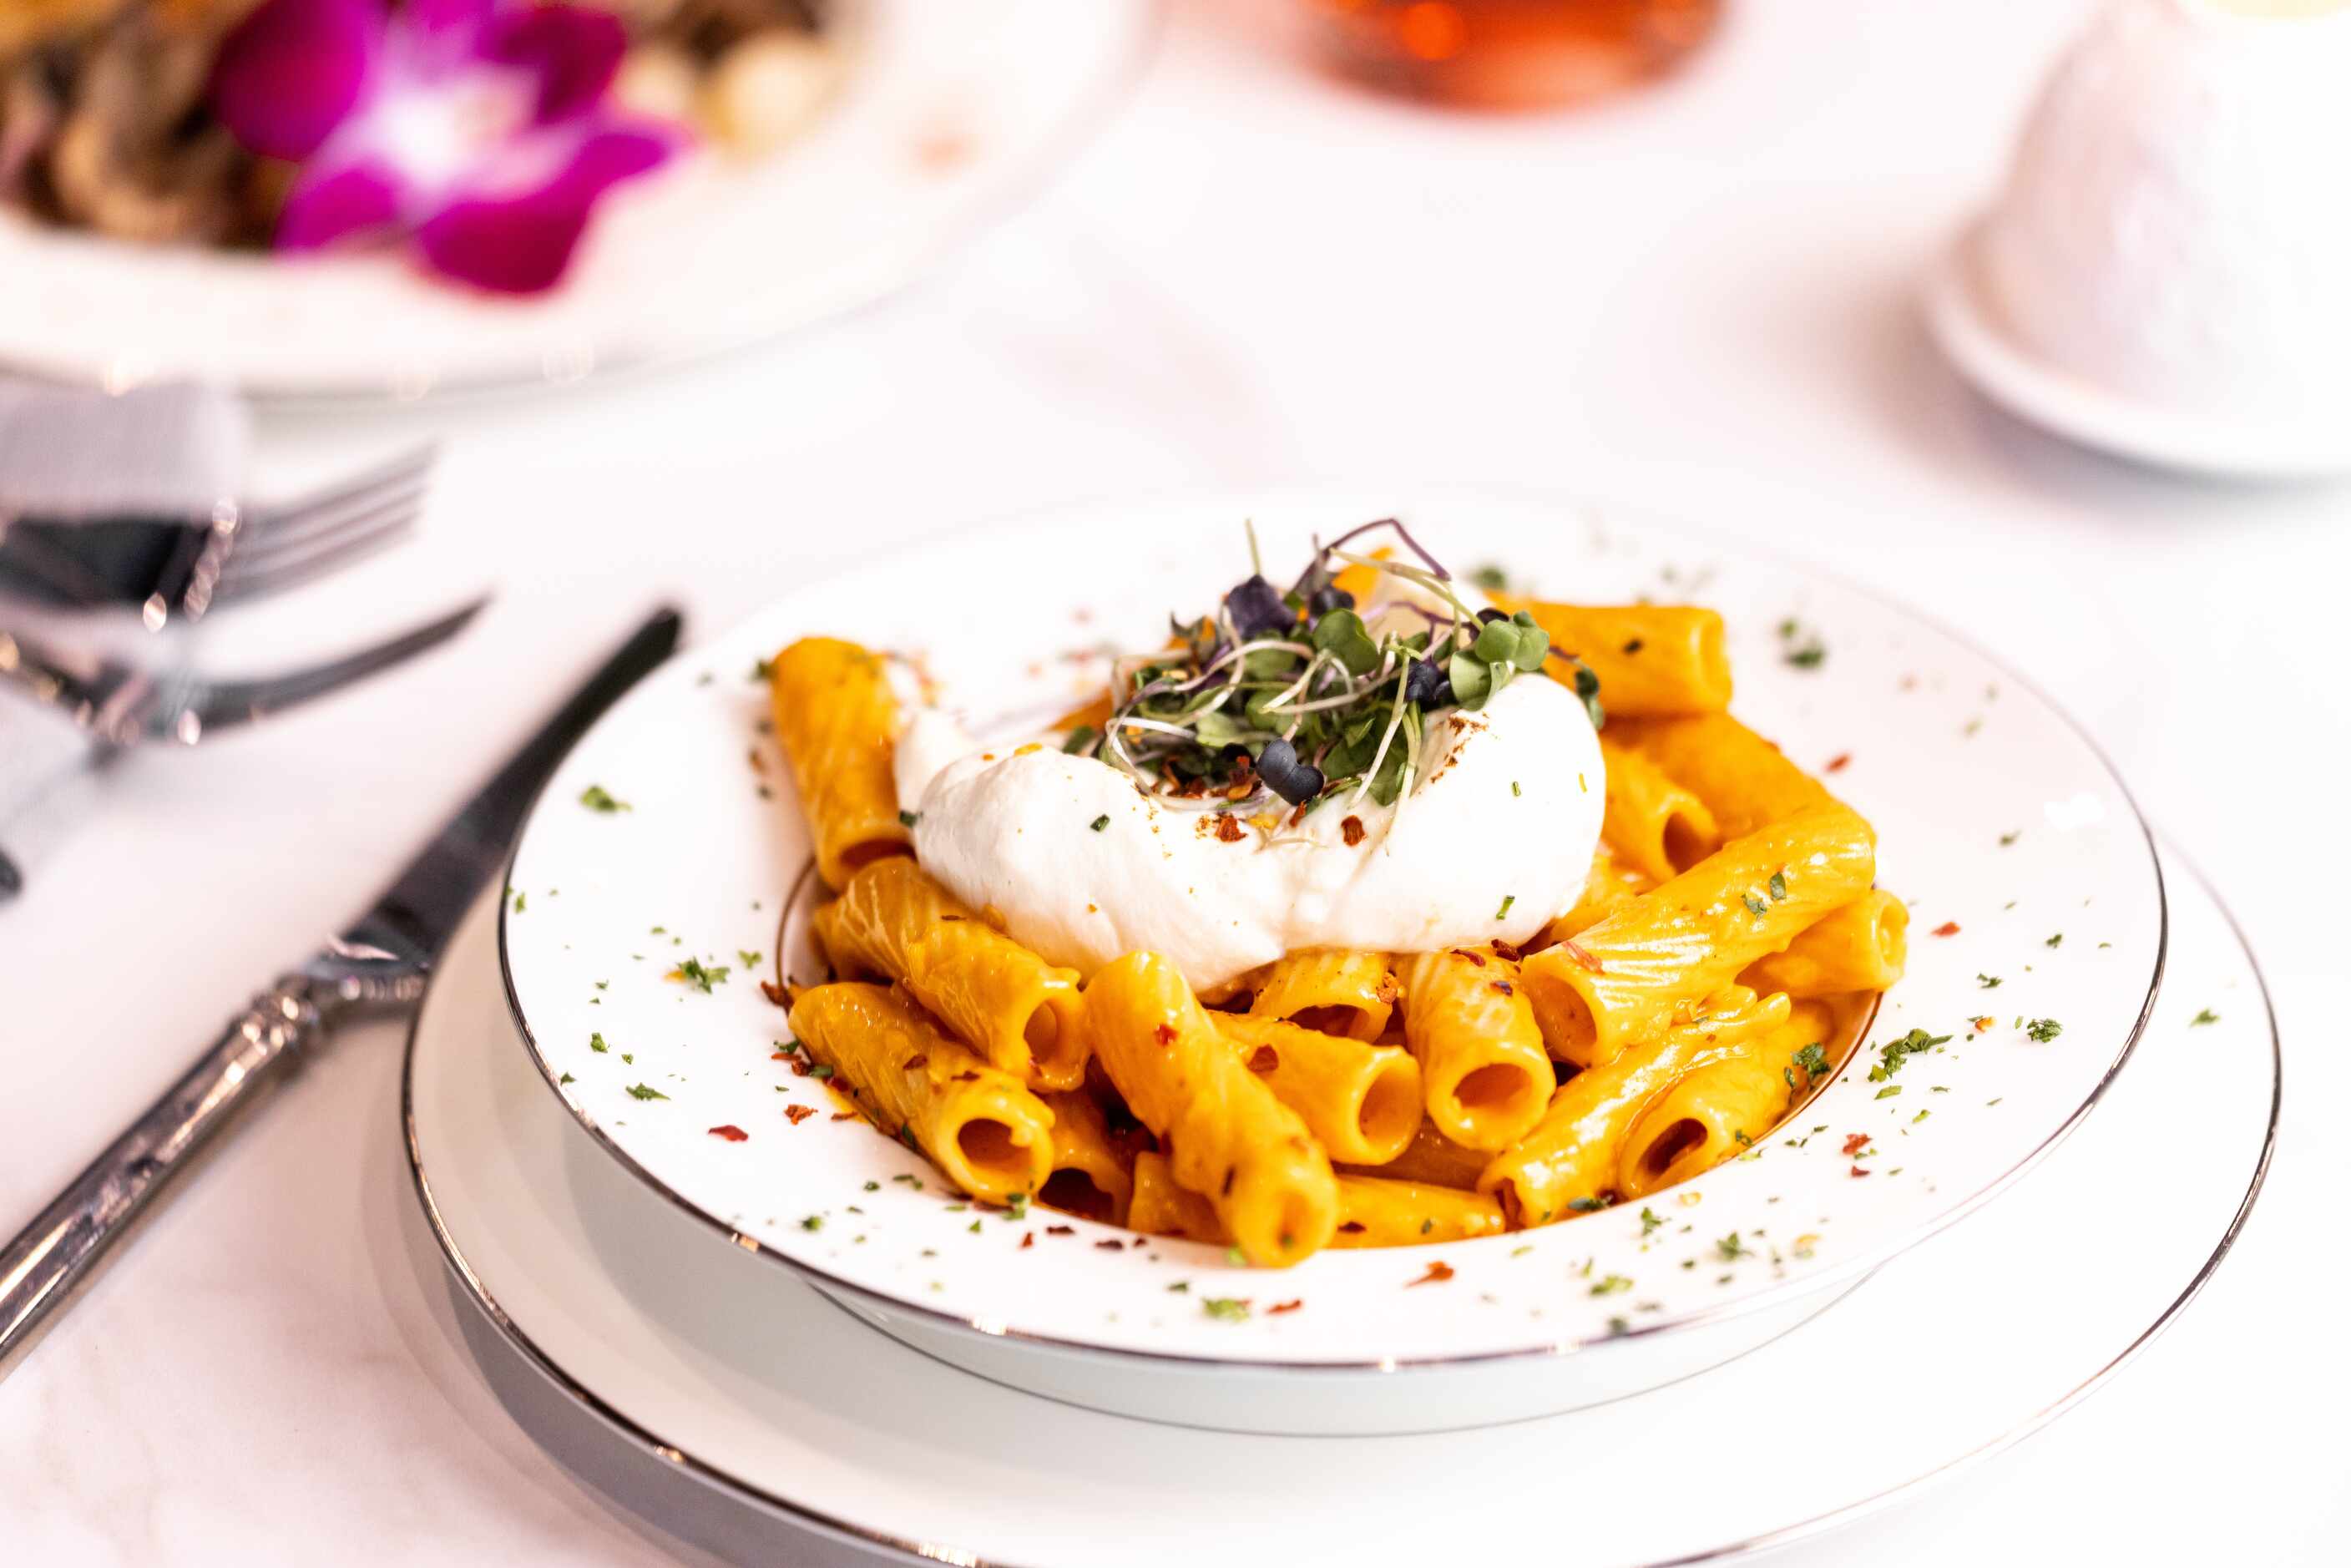 Spicy rigatoni, $25, is on the dinner menu at La Parisienne French Bistro in Frisco.